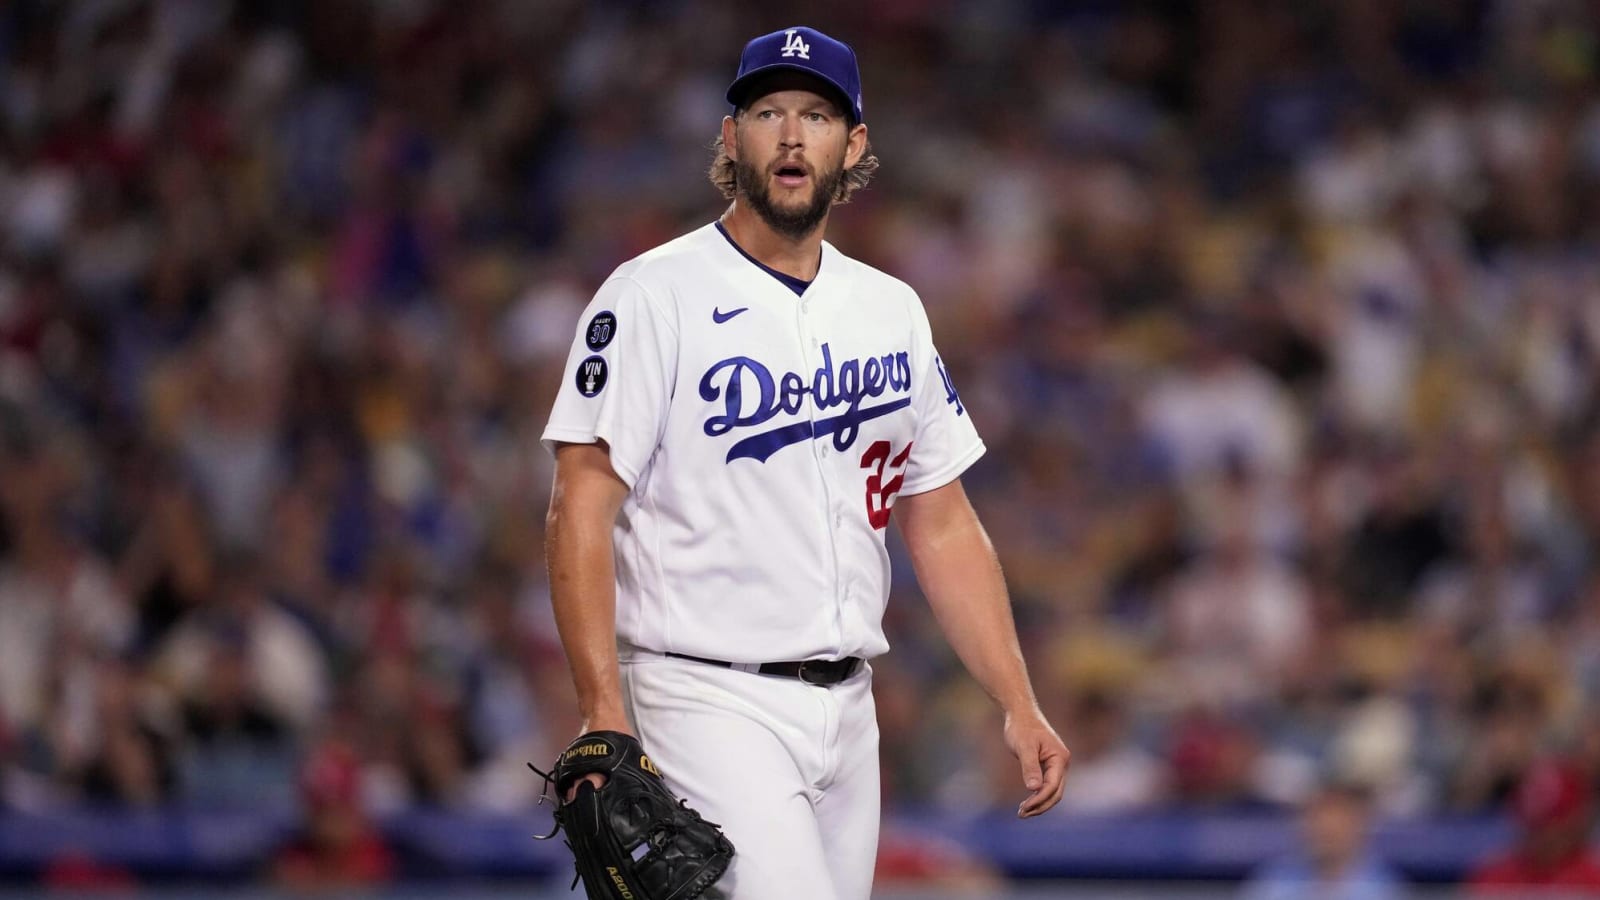 Clayton Kershaw is still his Hall-of-Fame self